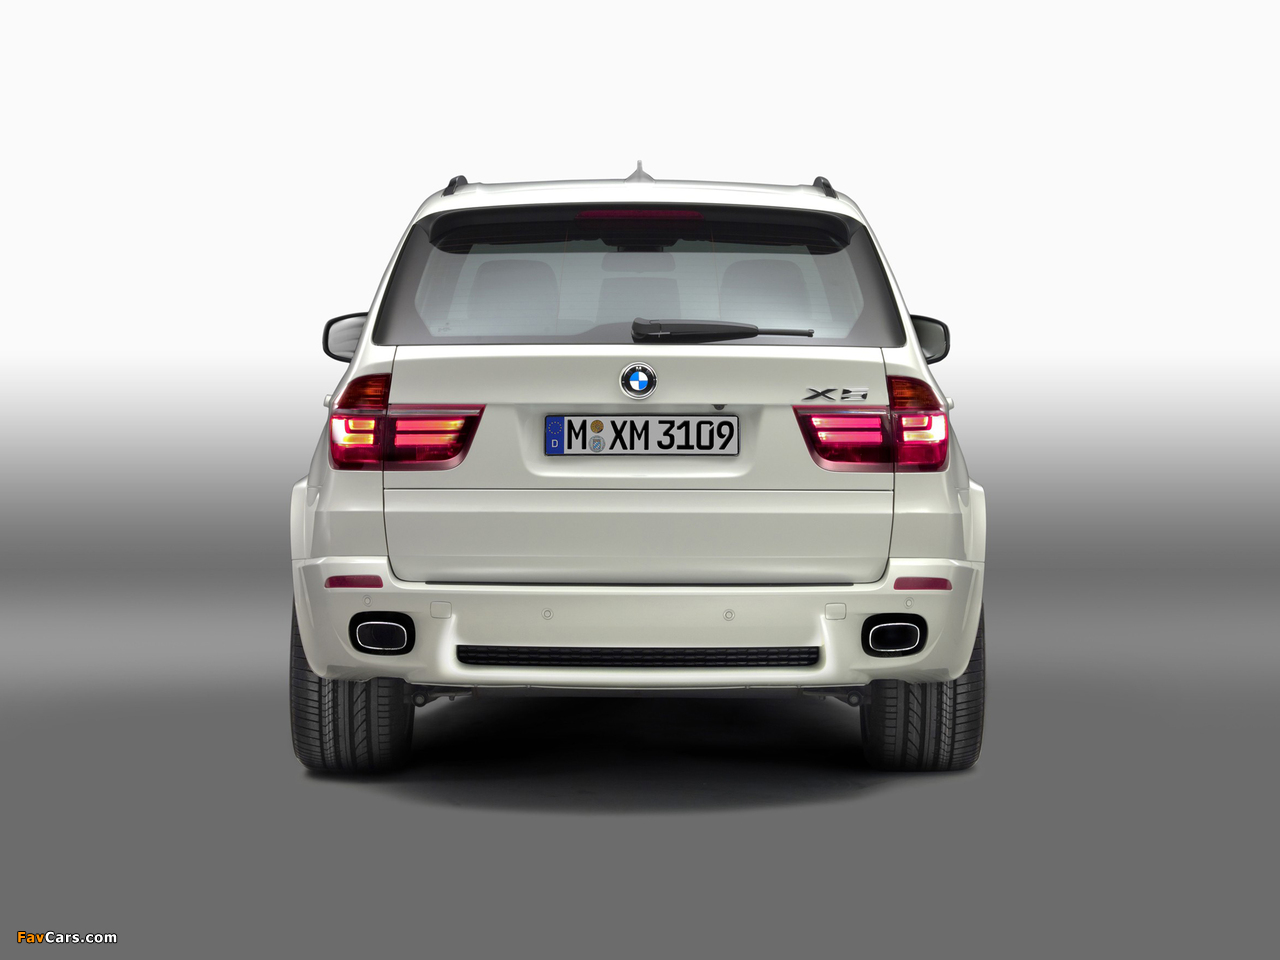 BMW X5 xDrive50i M Sports Package (E70) 2010 images (1280 x 960)